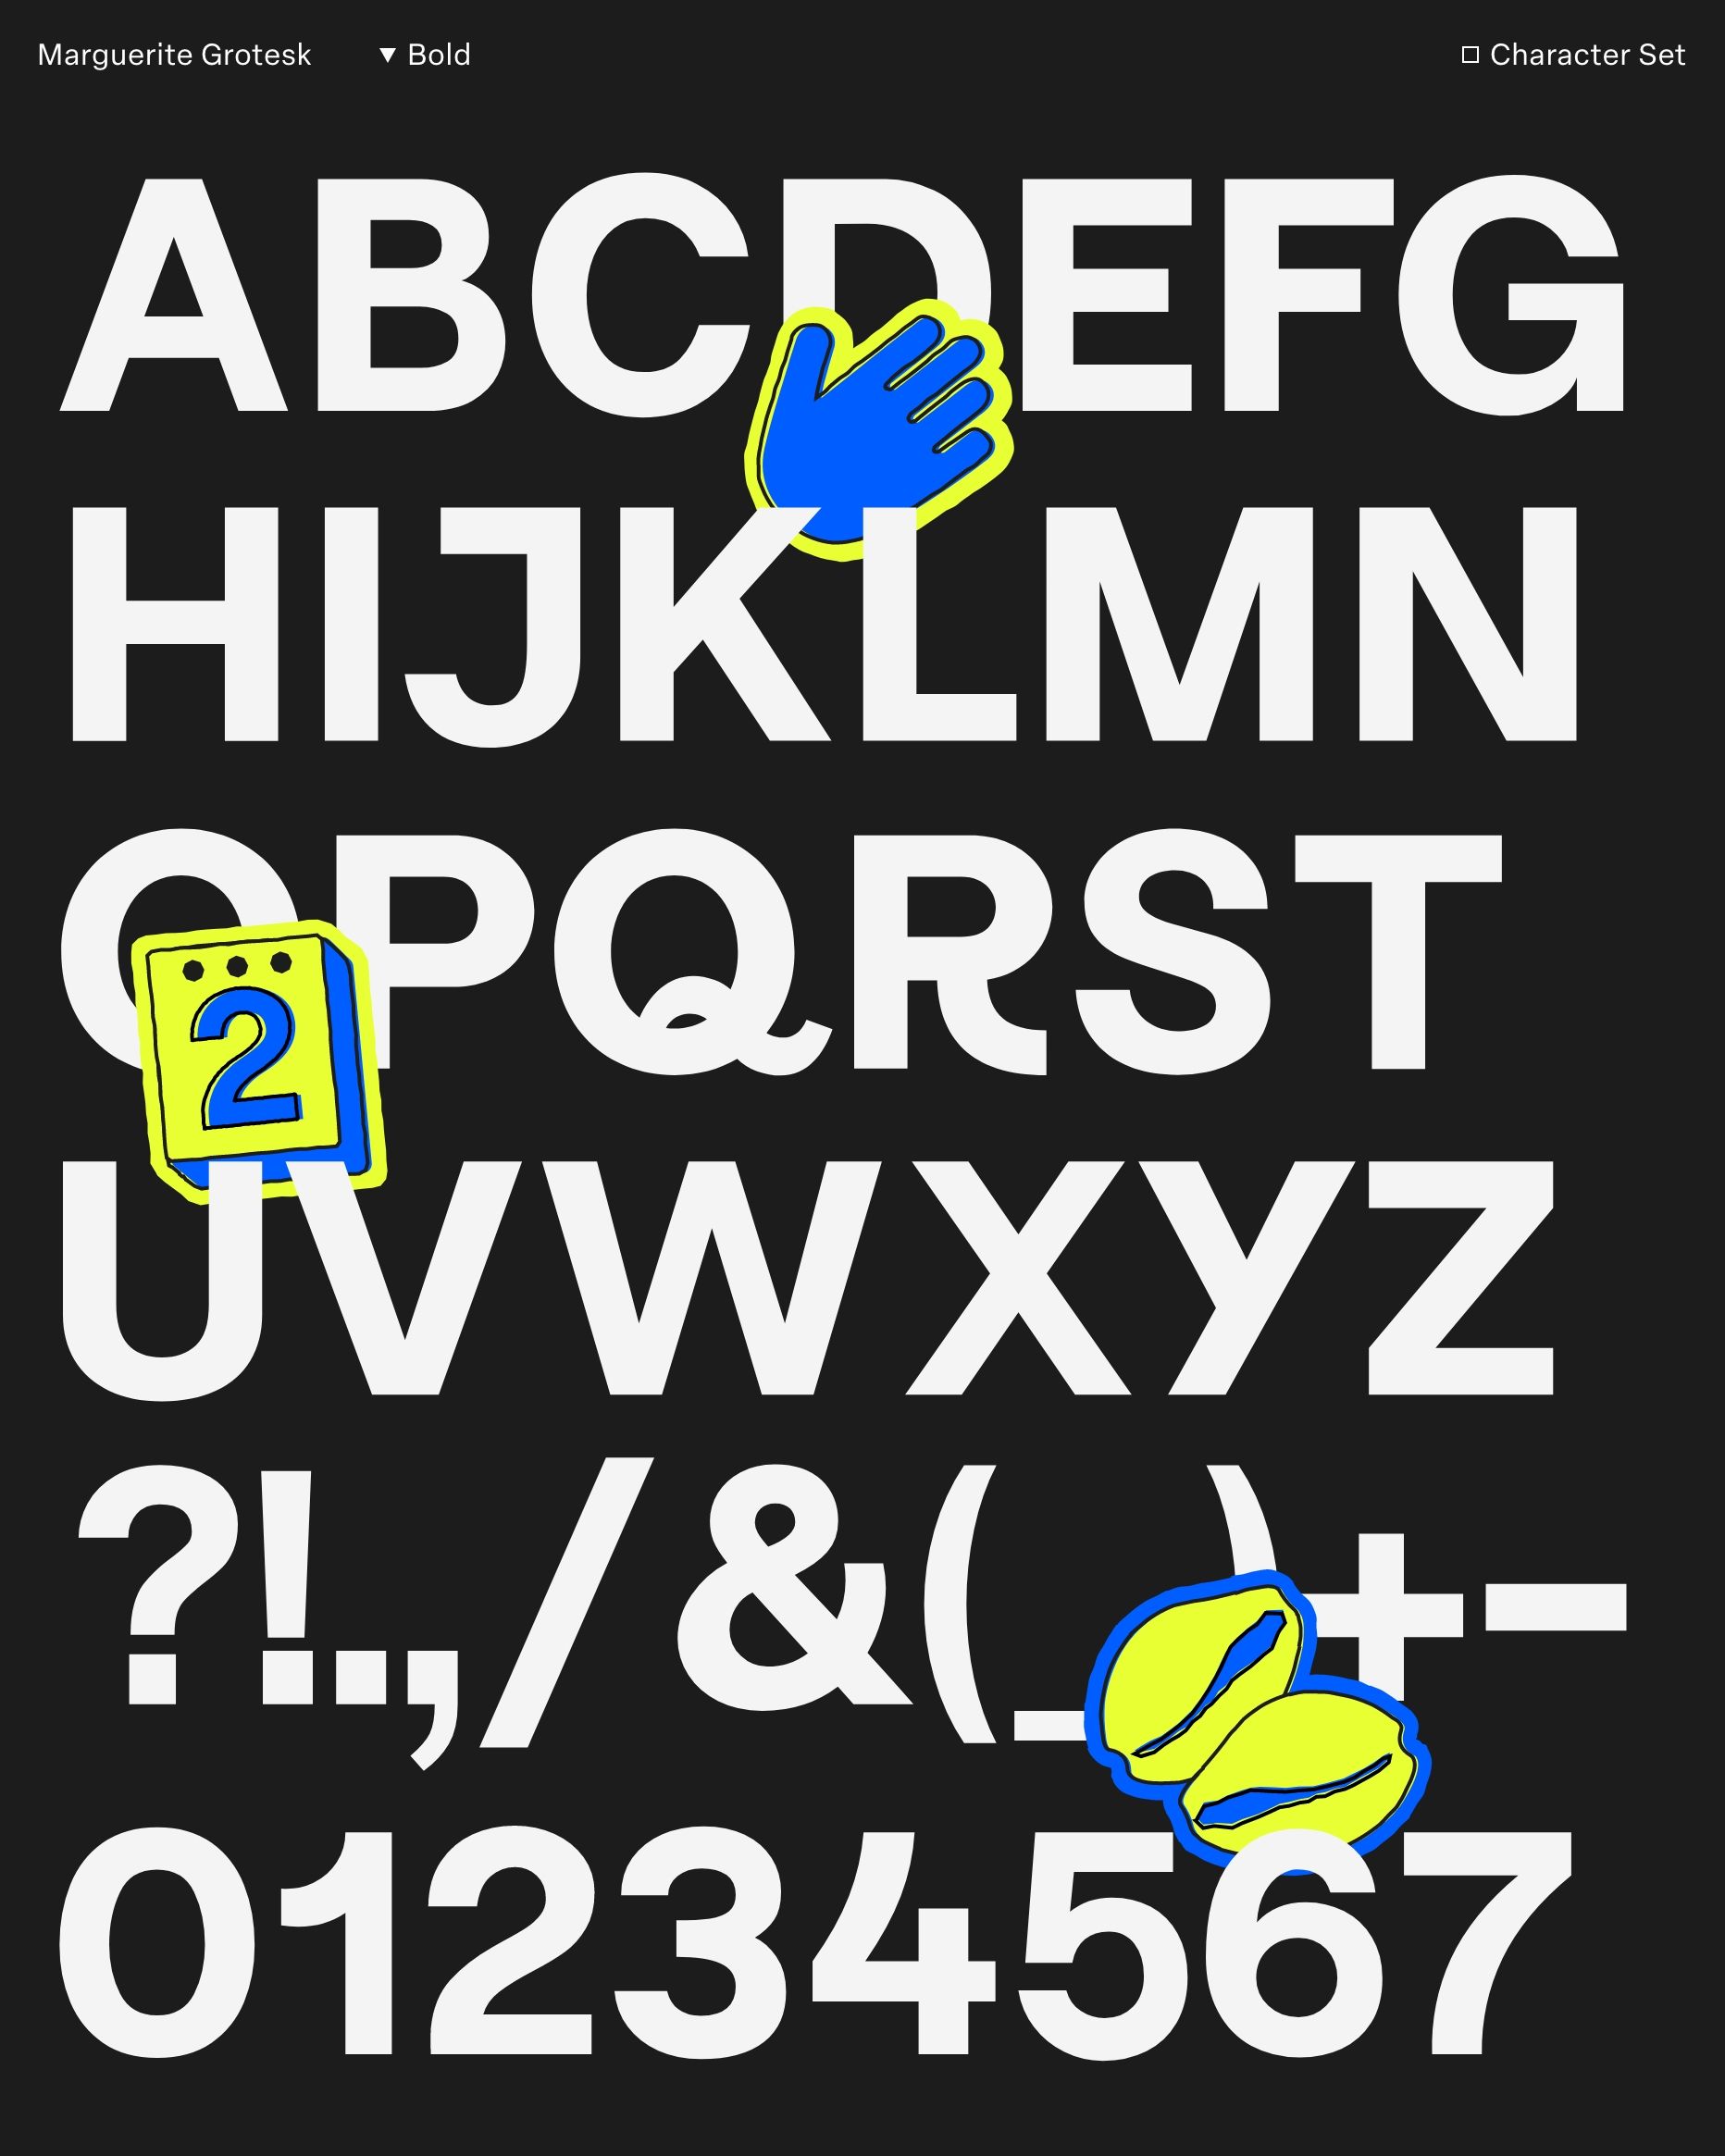 Typography character set with stickers over the top